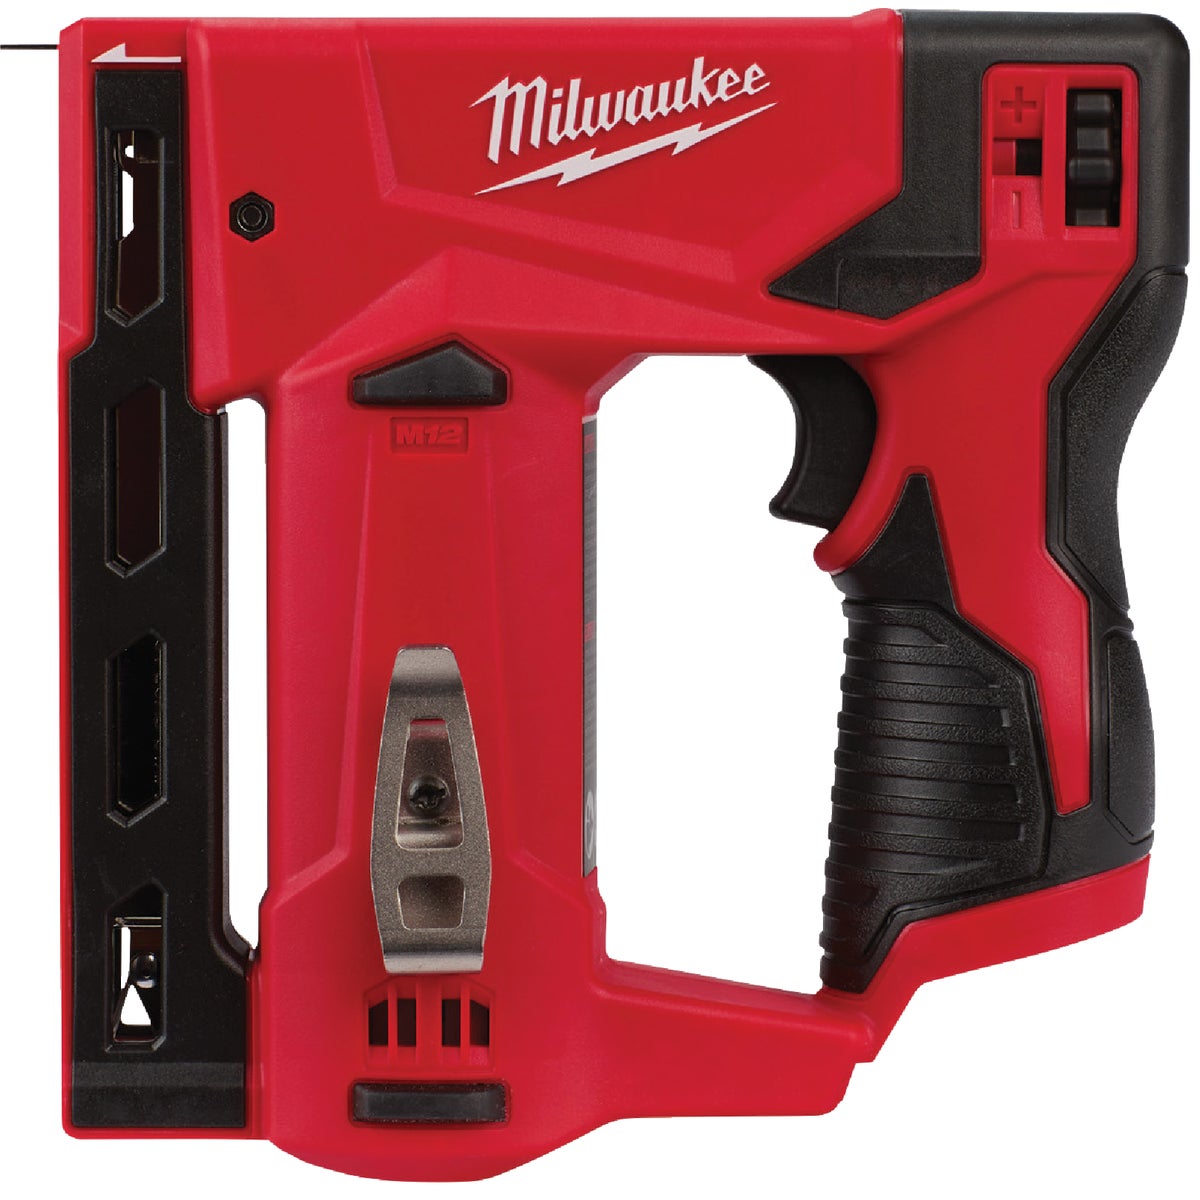 Item 303974, The Milwaukee M12 3/8" Crown Stapler delivers a true hand tool replacement